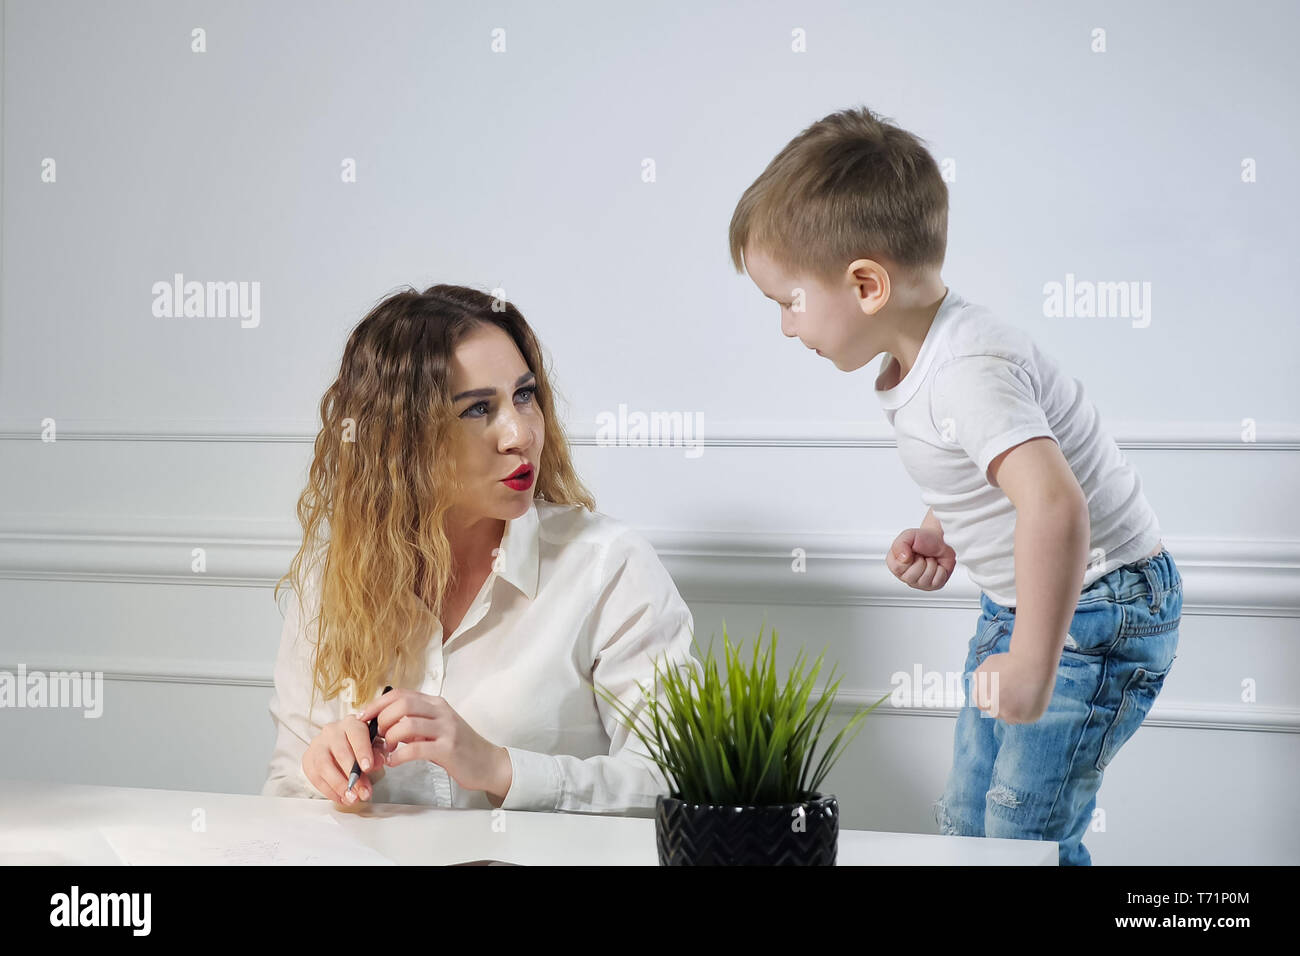 Young woman secretary with her little son in the workplace in office. Child requires his mother to play with him banging his fist on the table. Working mom. Stock Photo